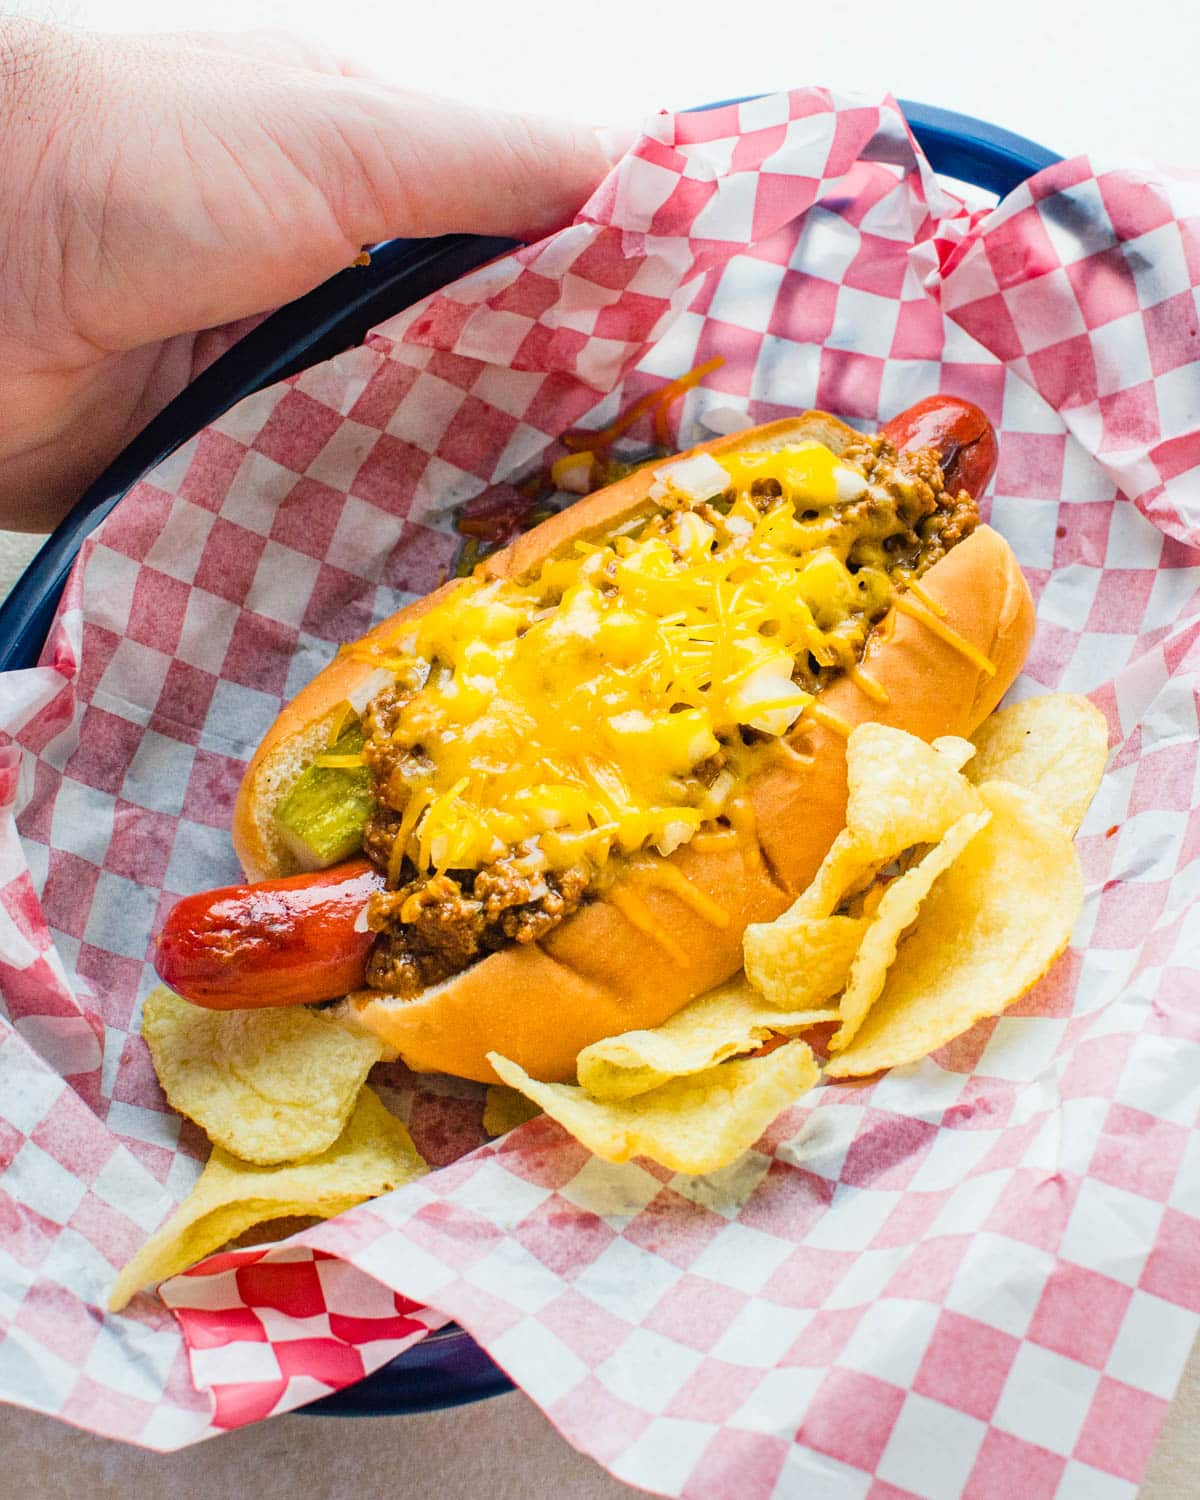 The chili dog in a paper lined basket.